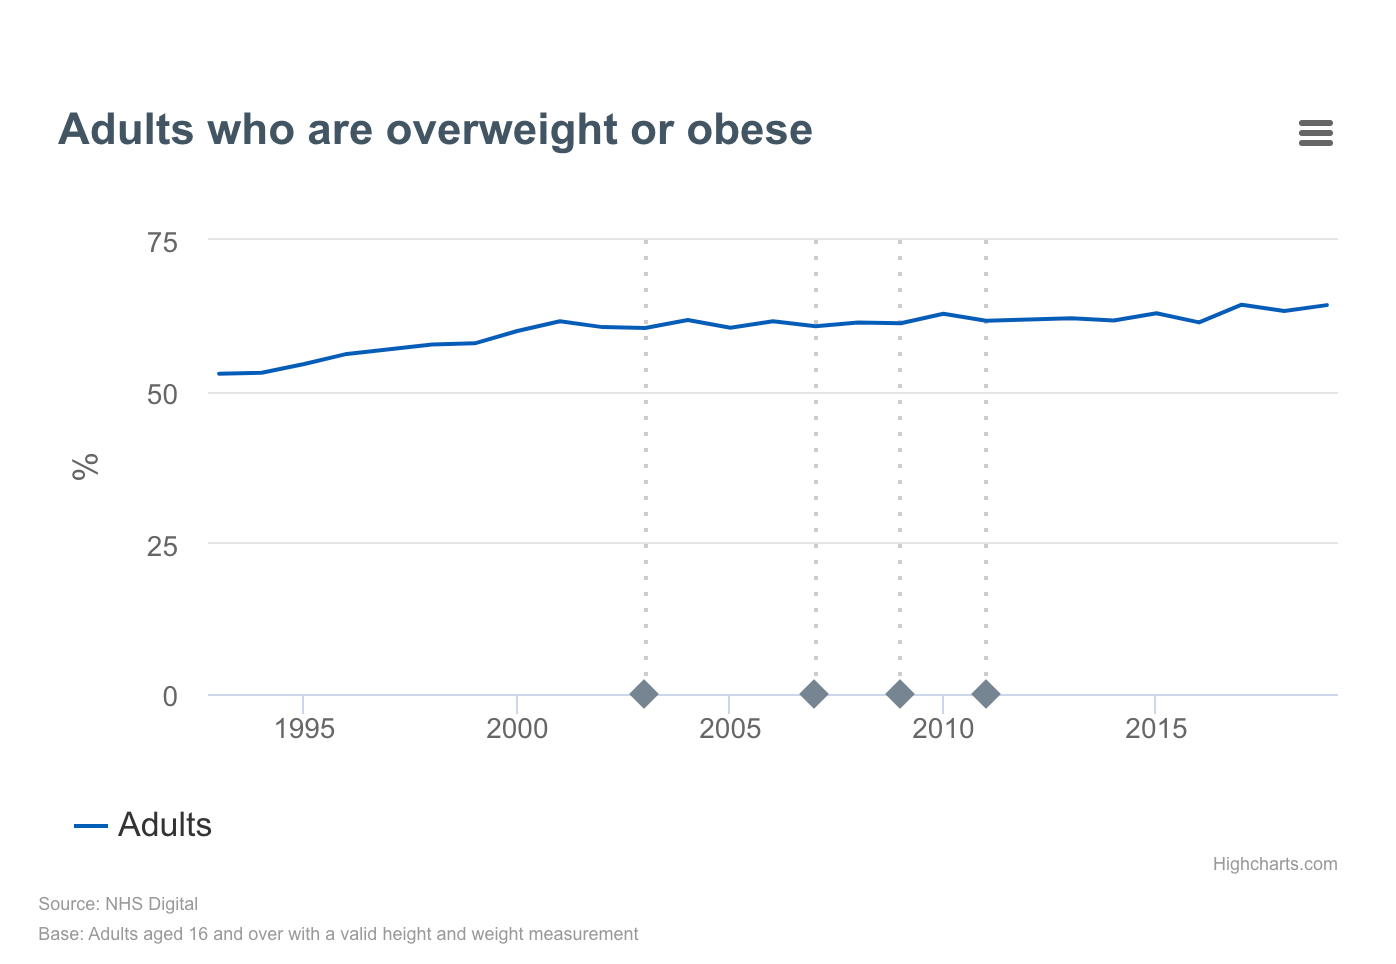 Adult obesity in the UK